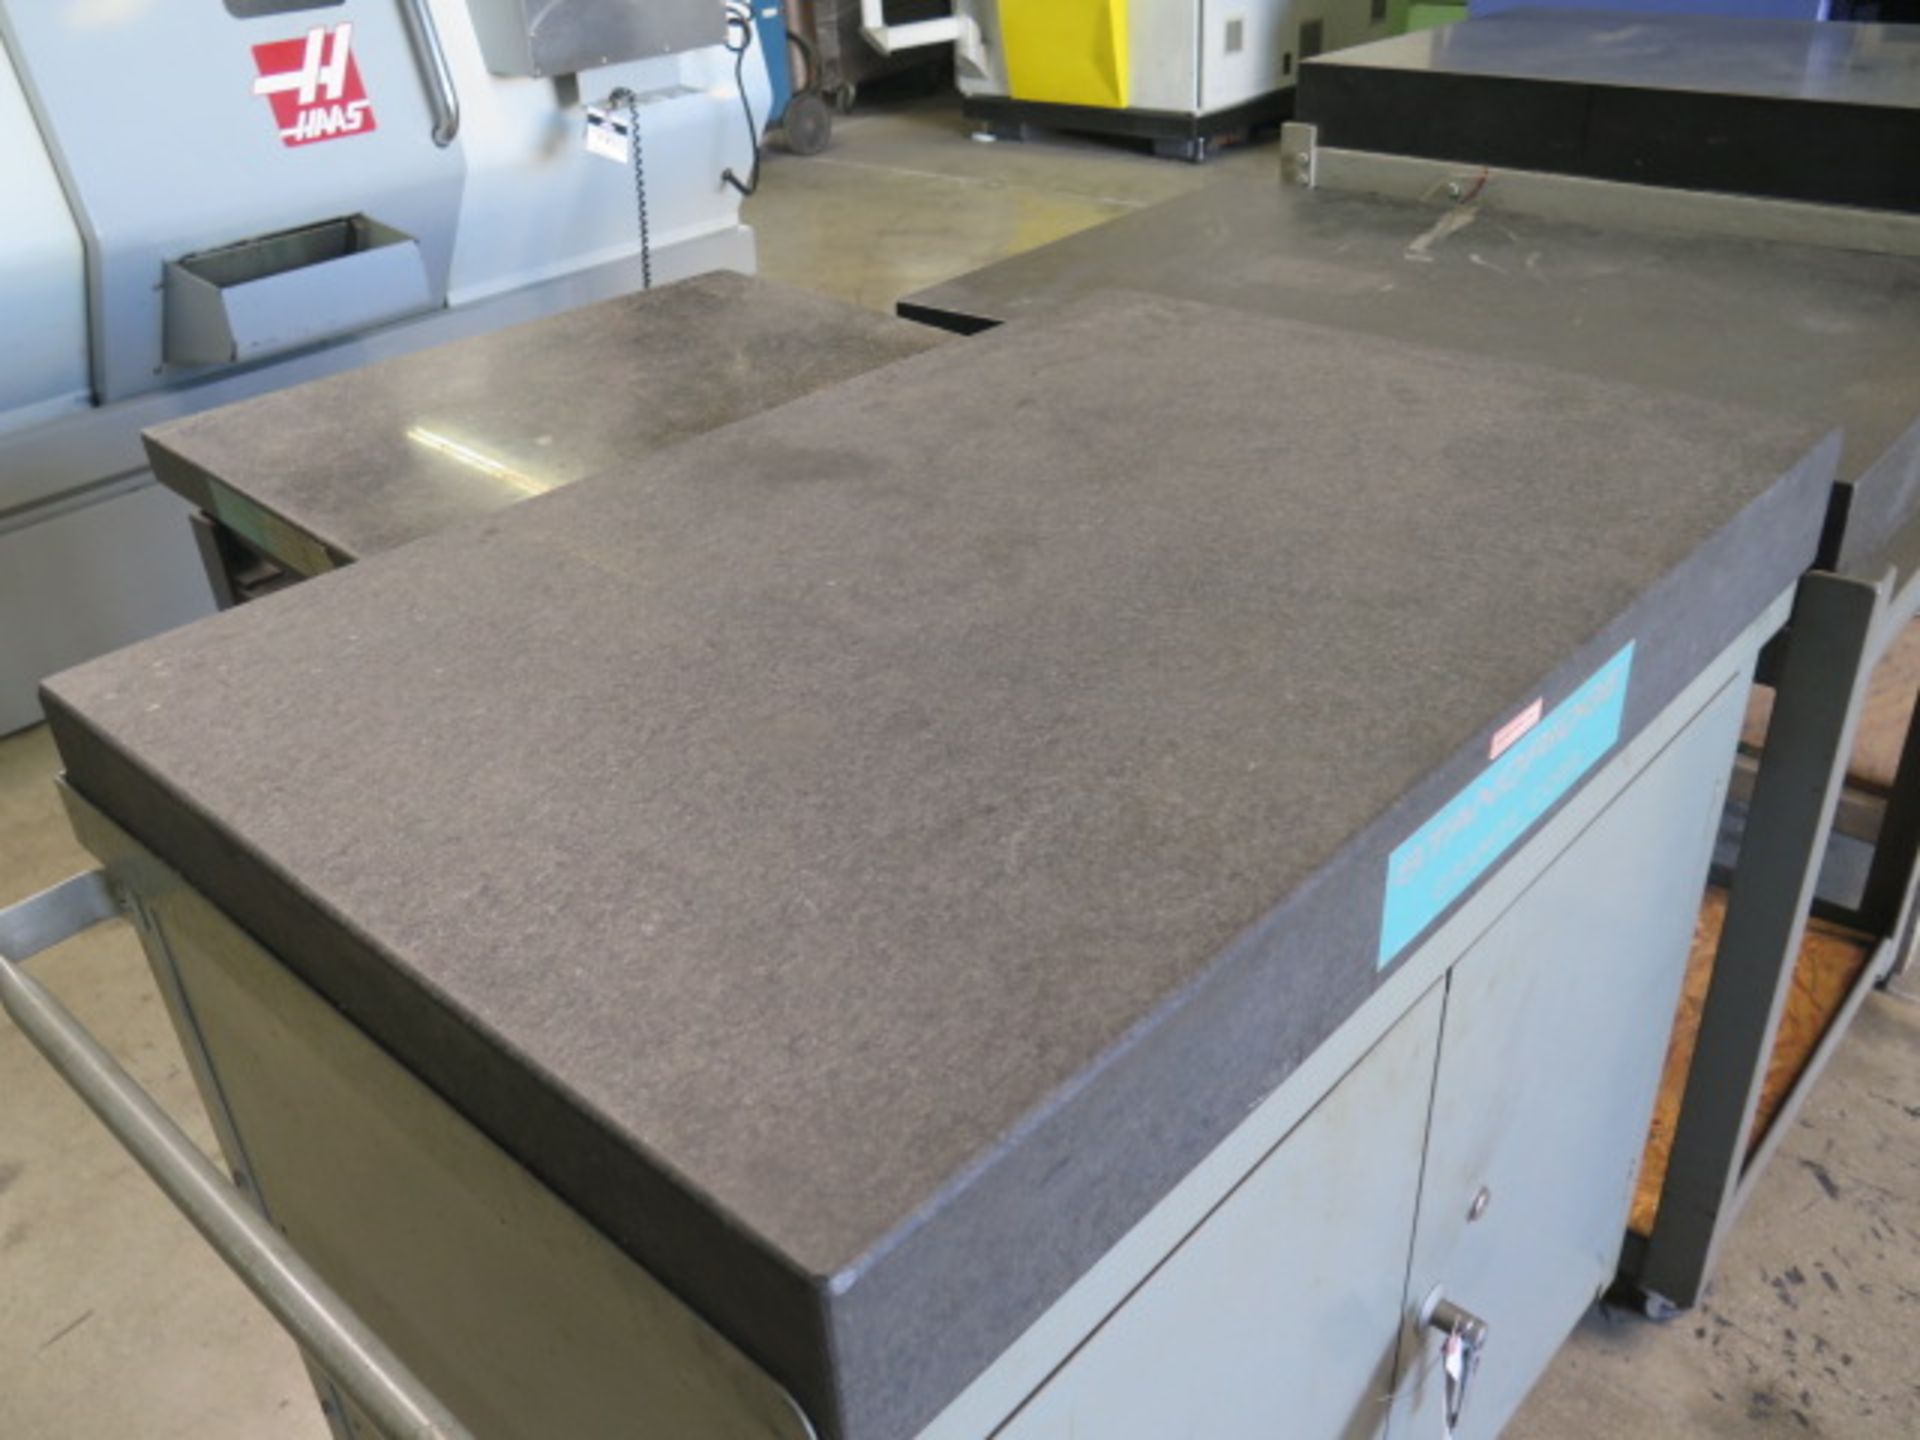 Standridge 24" x 36" x 4" Granite Surface Plate w/ Cabinet Base (SOLD AS-IS - NO WARRANTY) - Image 3 of 6